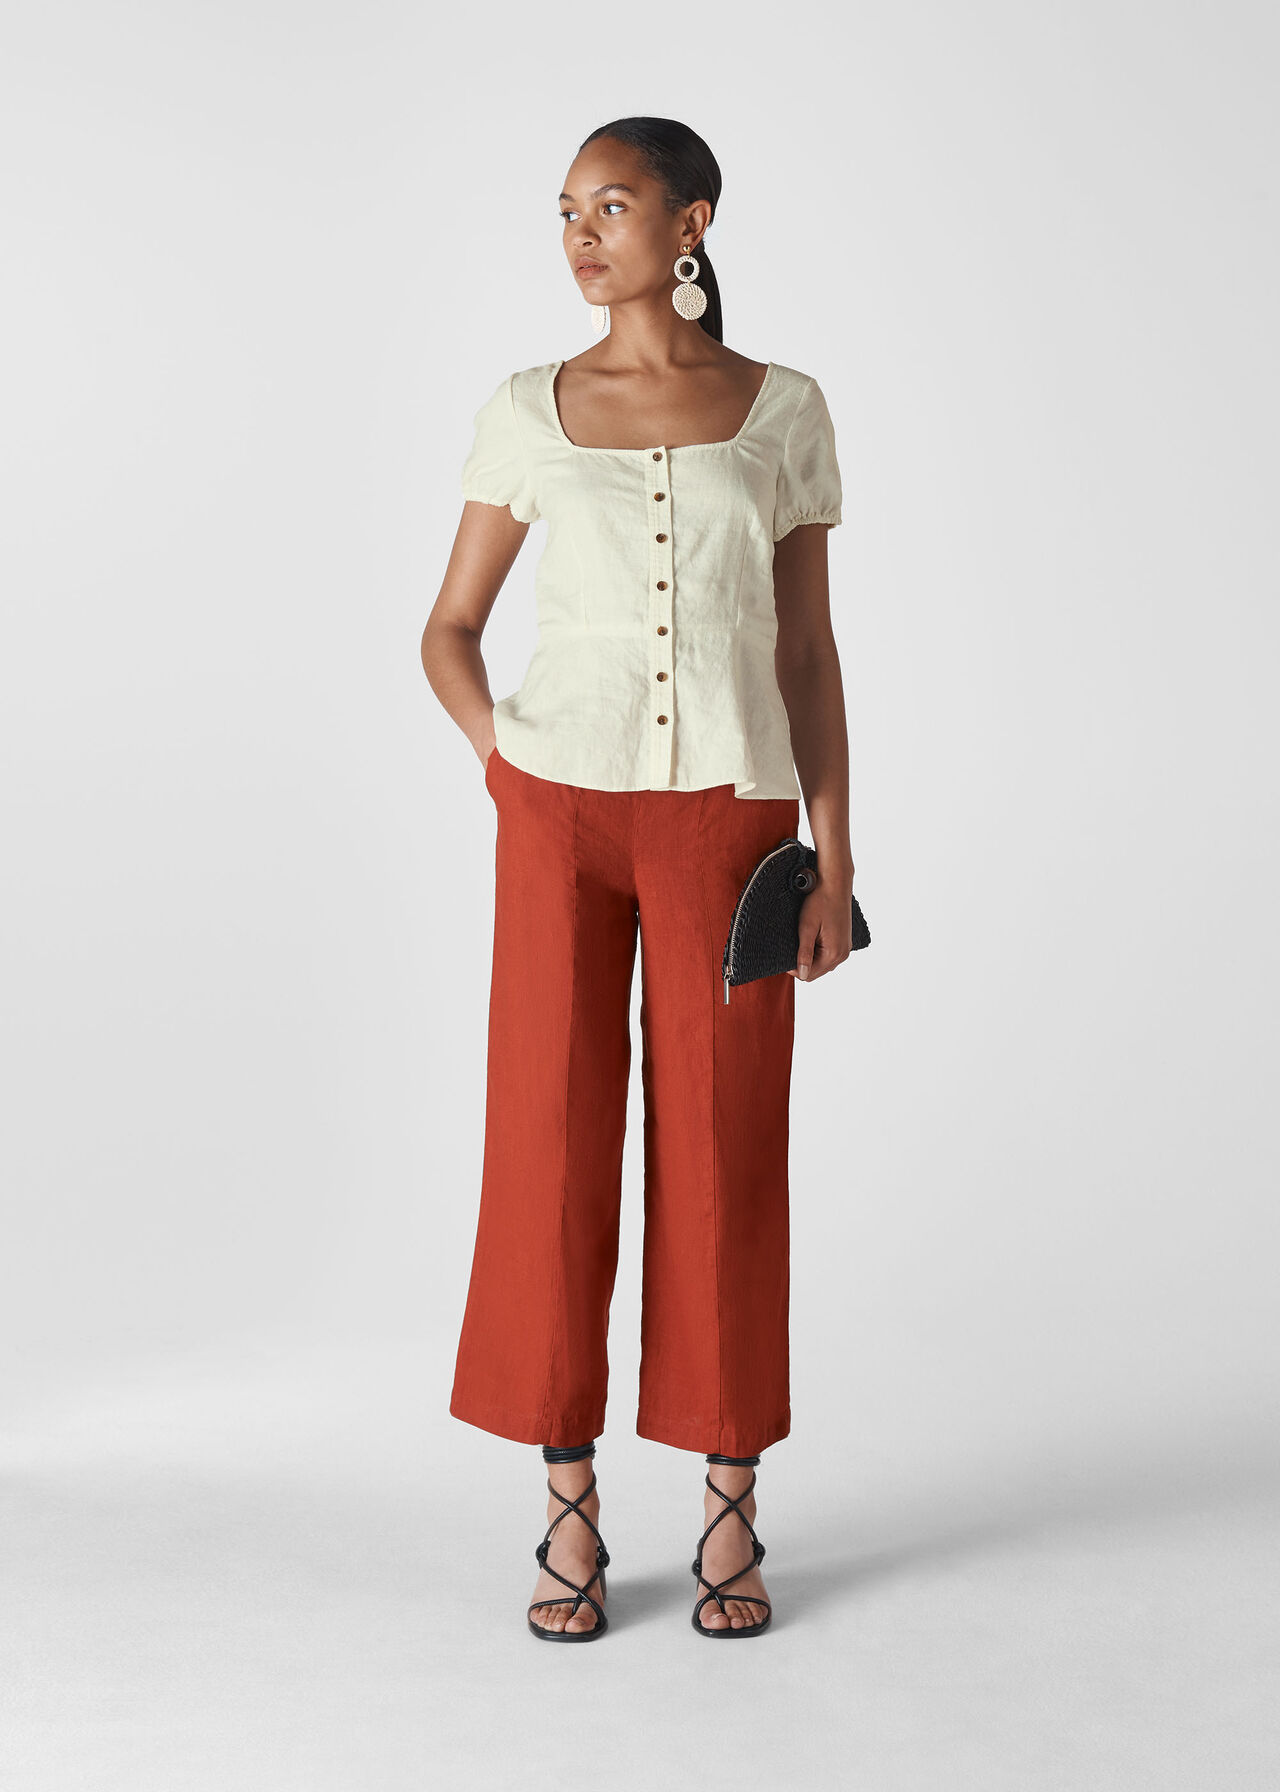 Ivory/Multi Alana Waisted Linen Top | WHISTLES